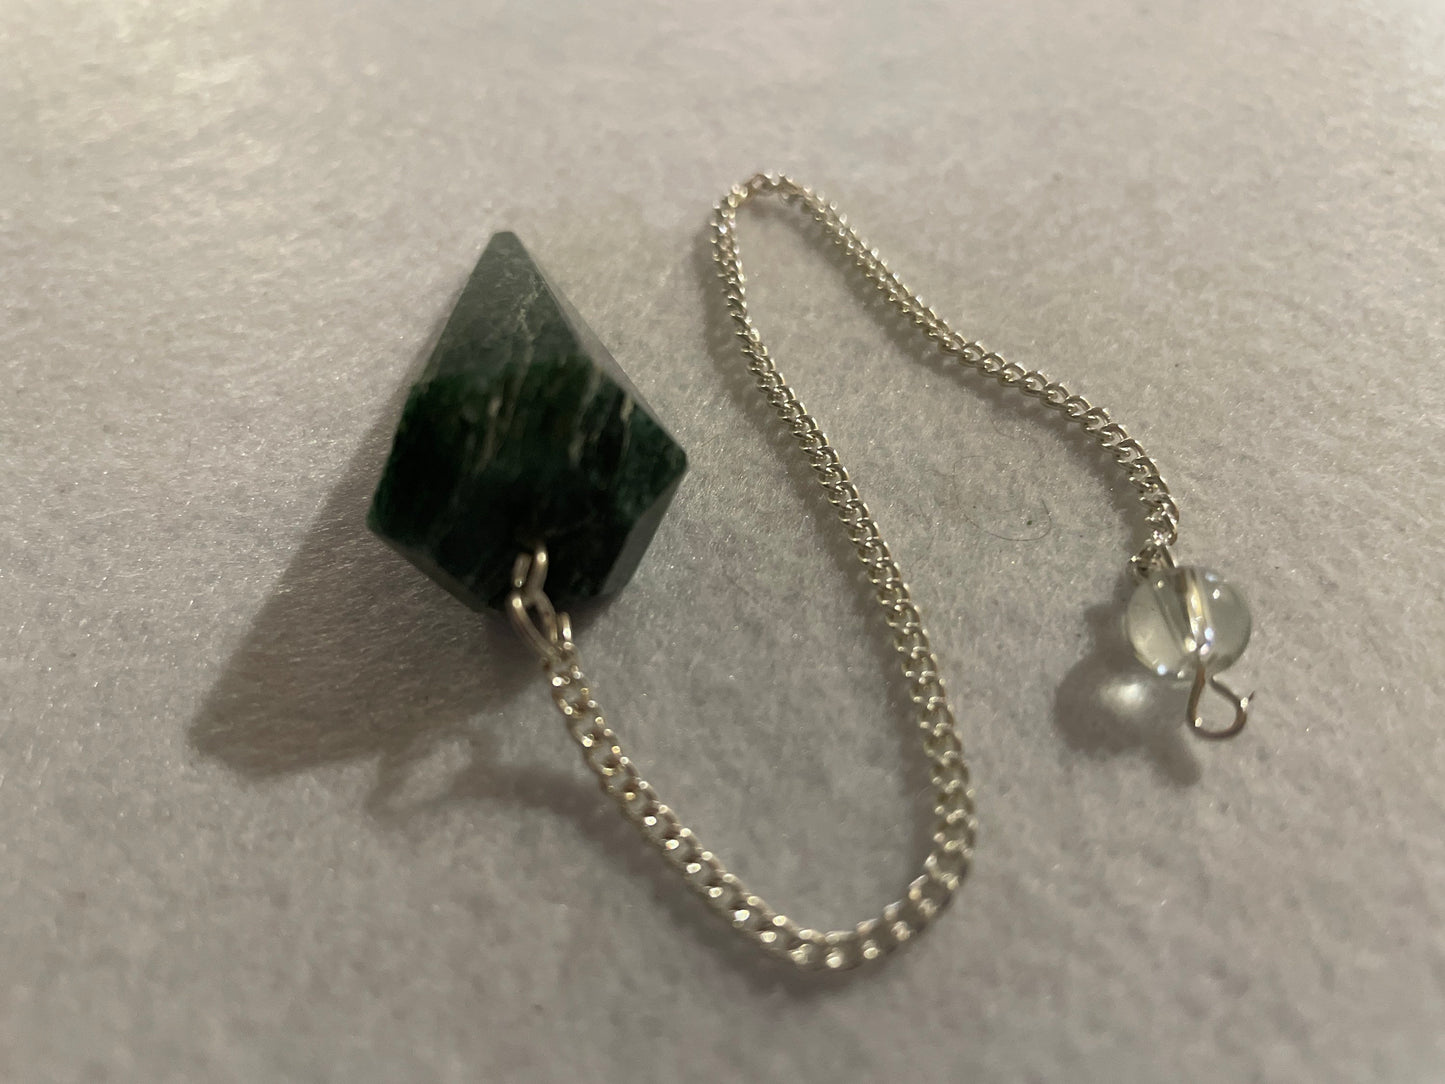 Jade Pendulum is  1.75” and with chain is 8.5”